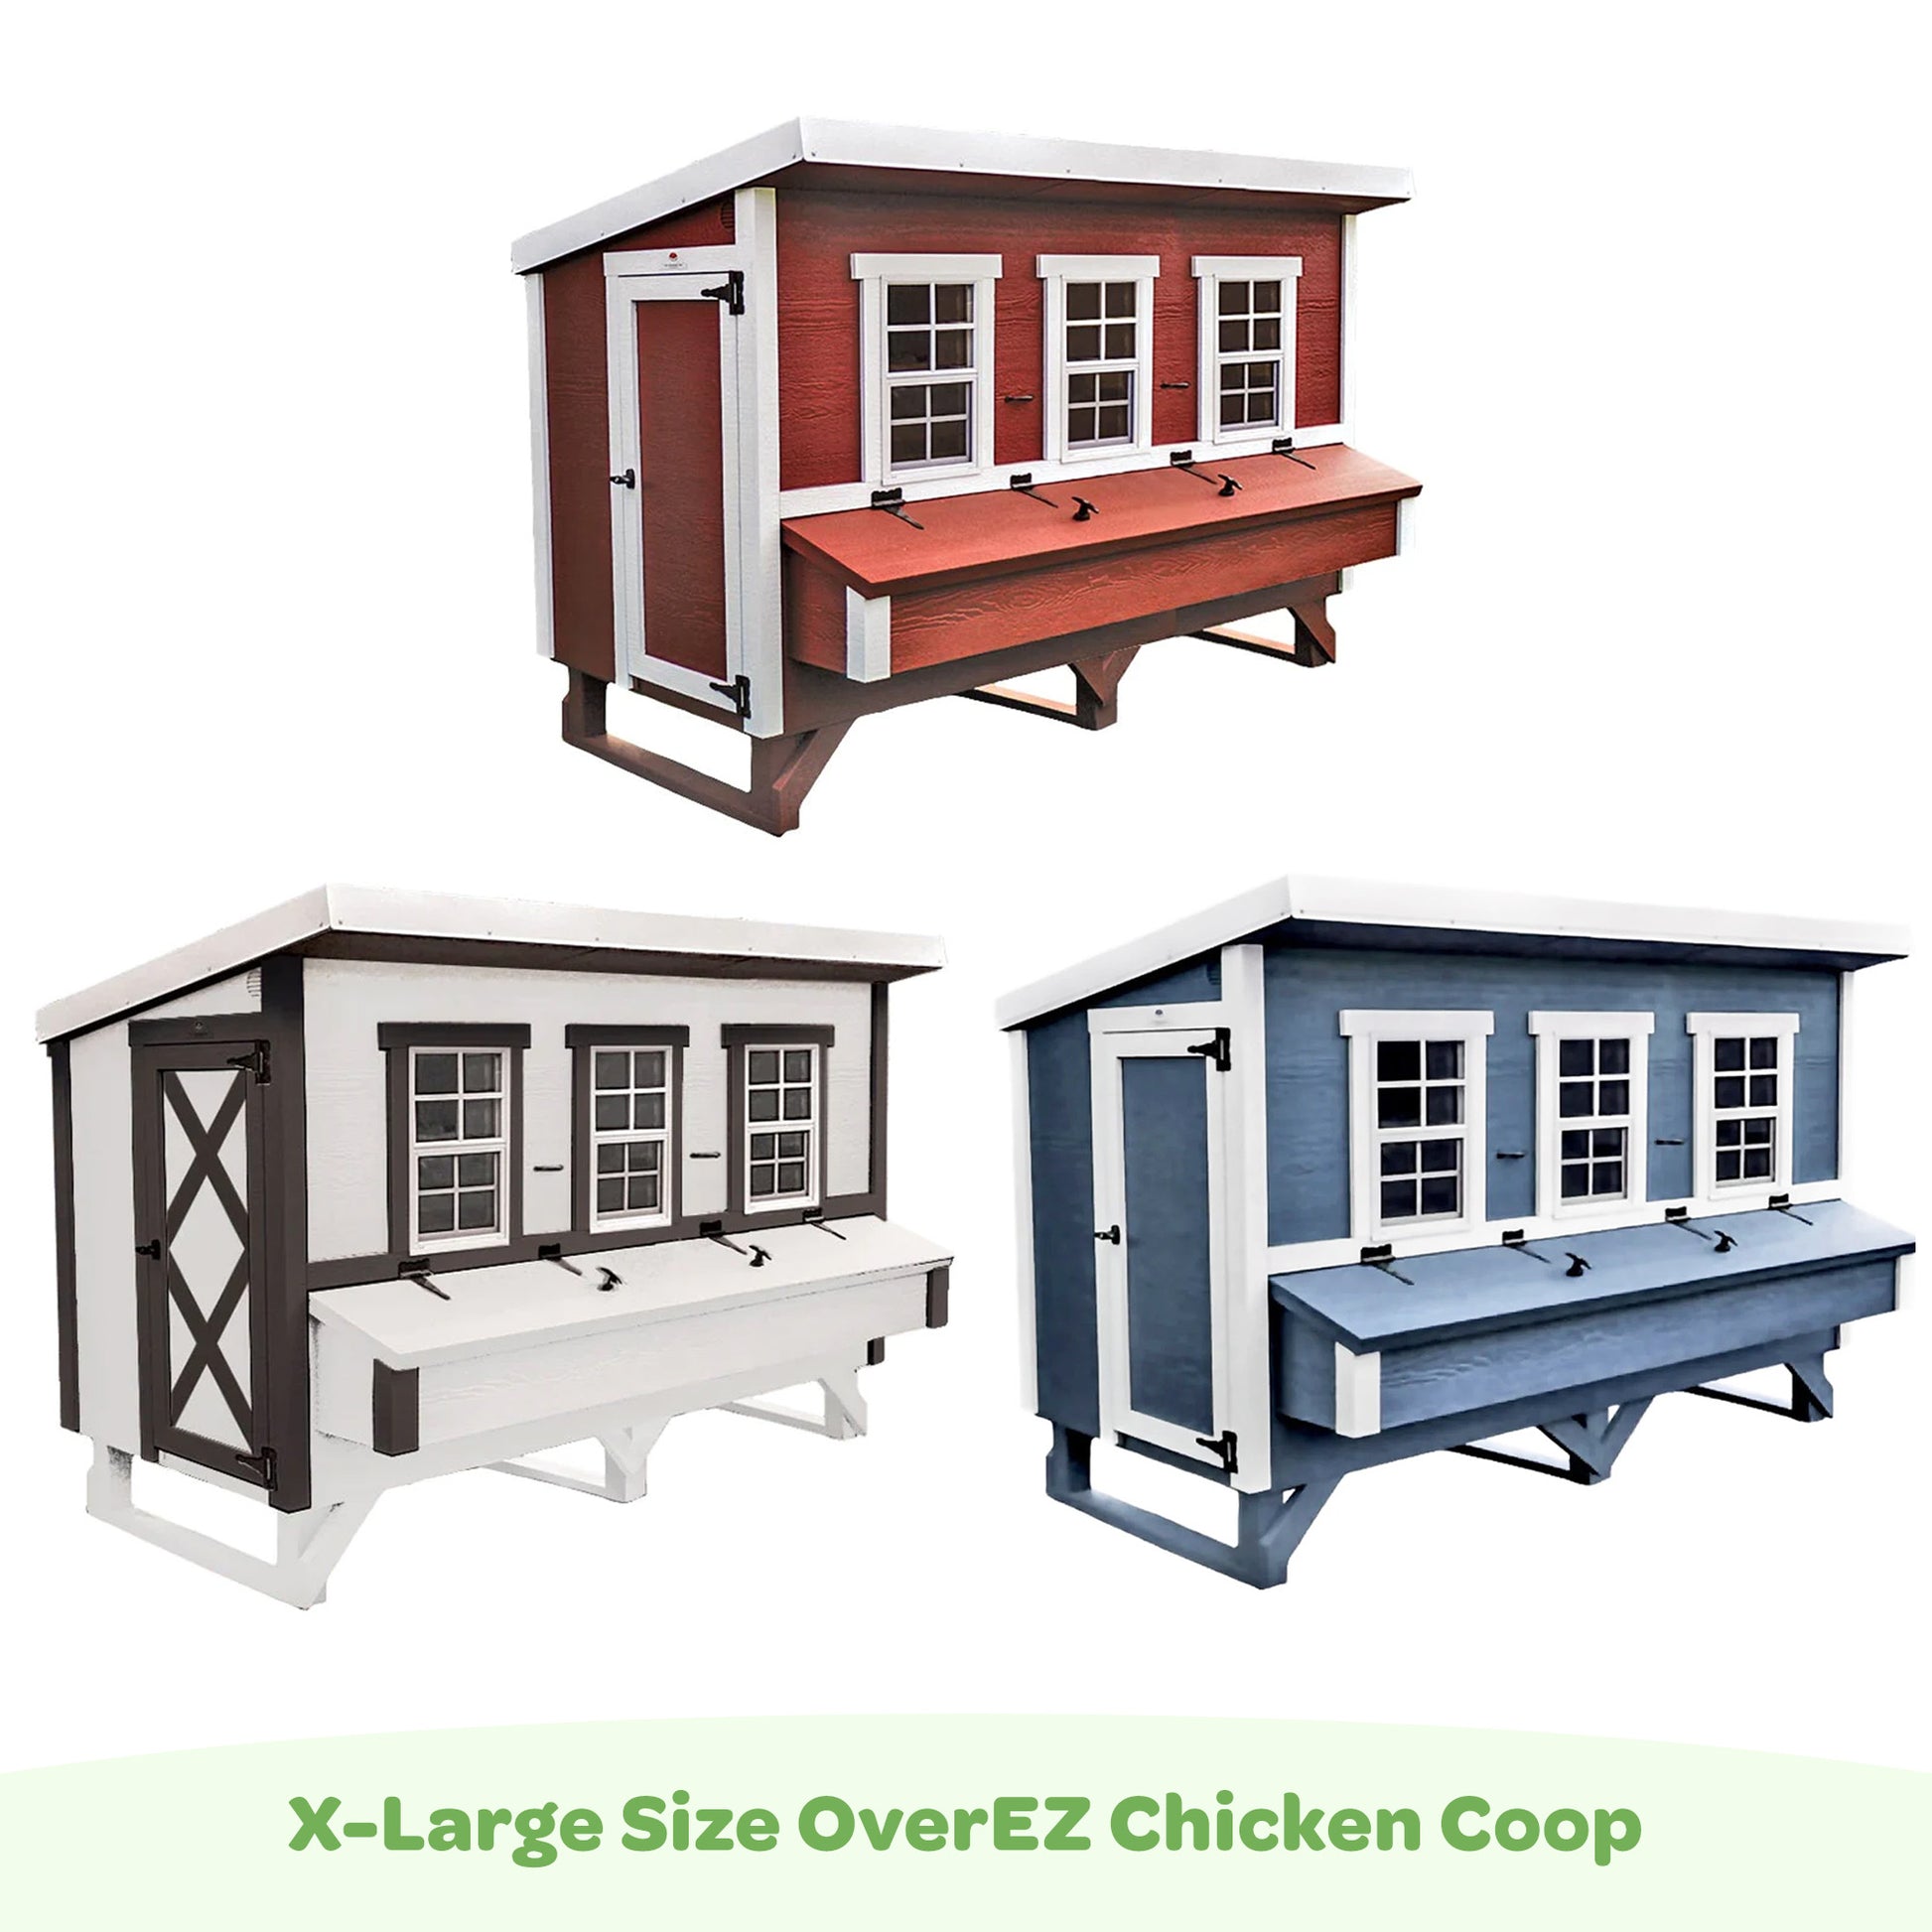 X-Large OverEZ Chicken coops, 3 colors